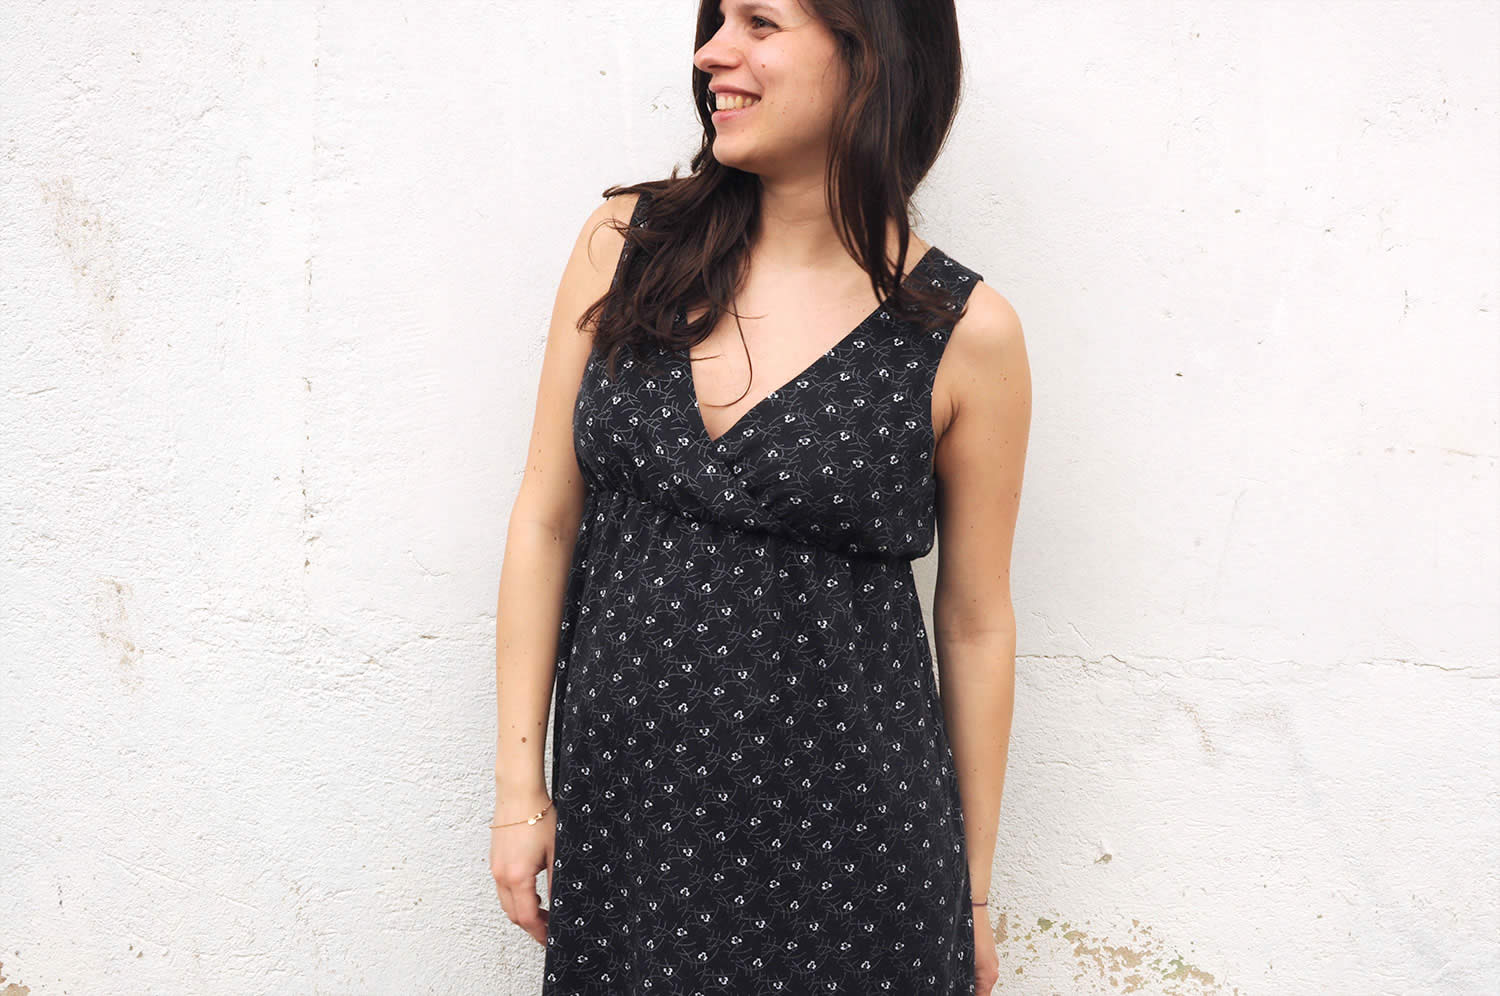 Ladulsatina - Sewing and DIY Fashion blog - Summer floral empire line dress - self-drafted